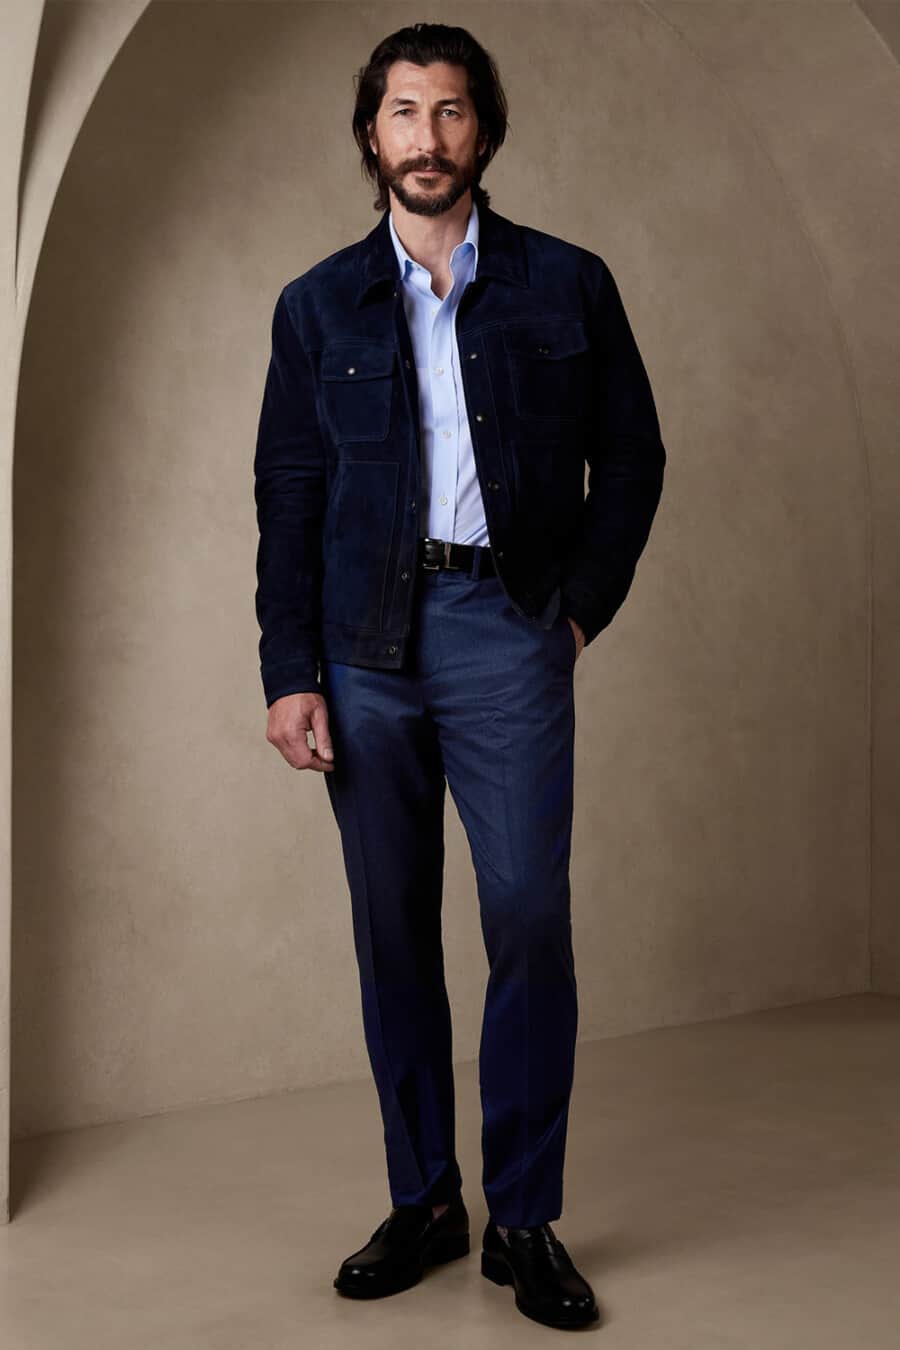 Men's navy tailored pants, light blue shirt, navy suede trucker jacket and black leather penny loafers business casual outfit